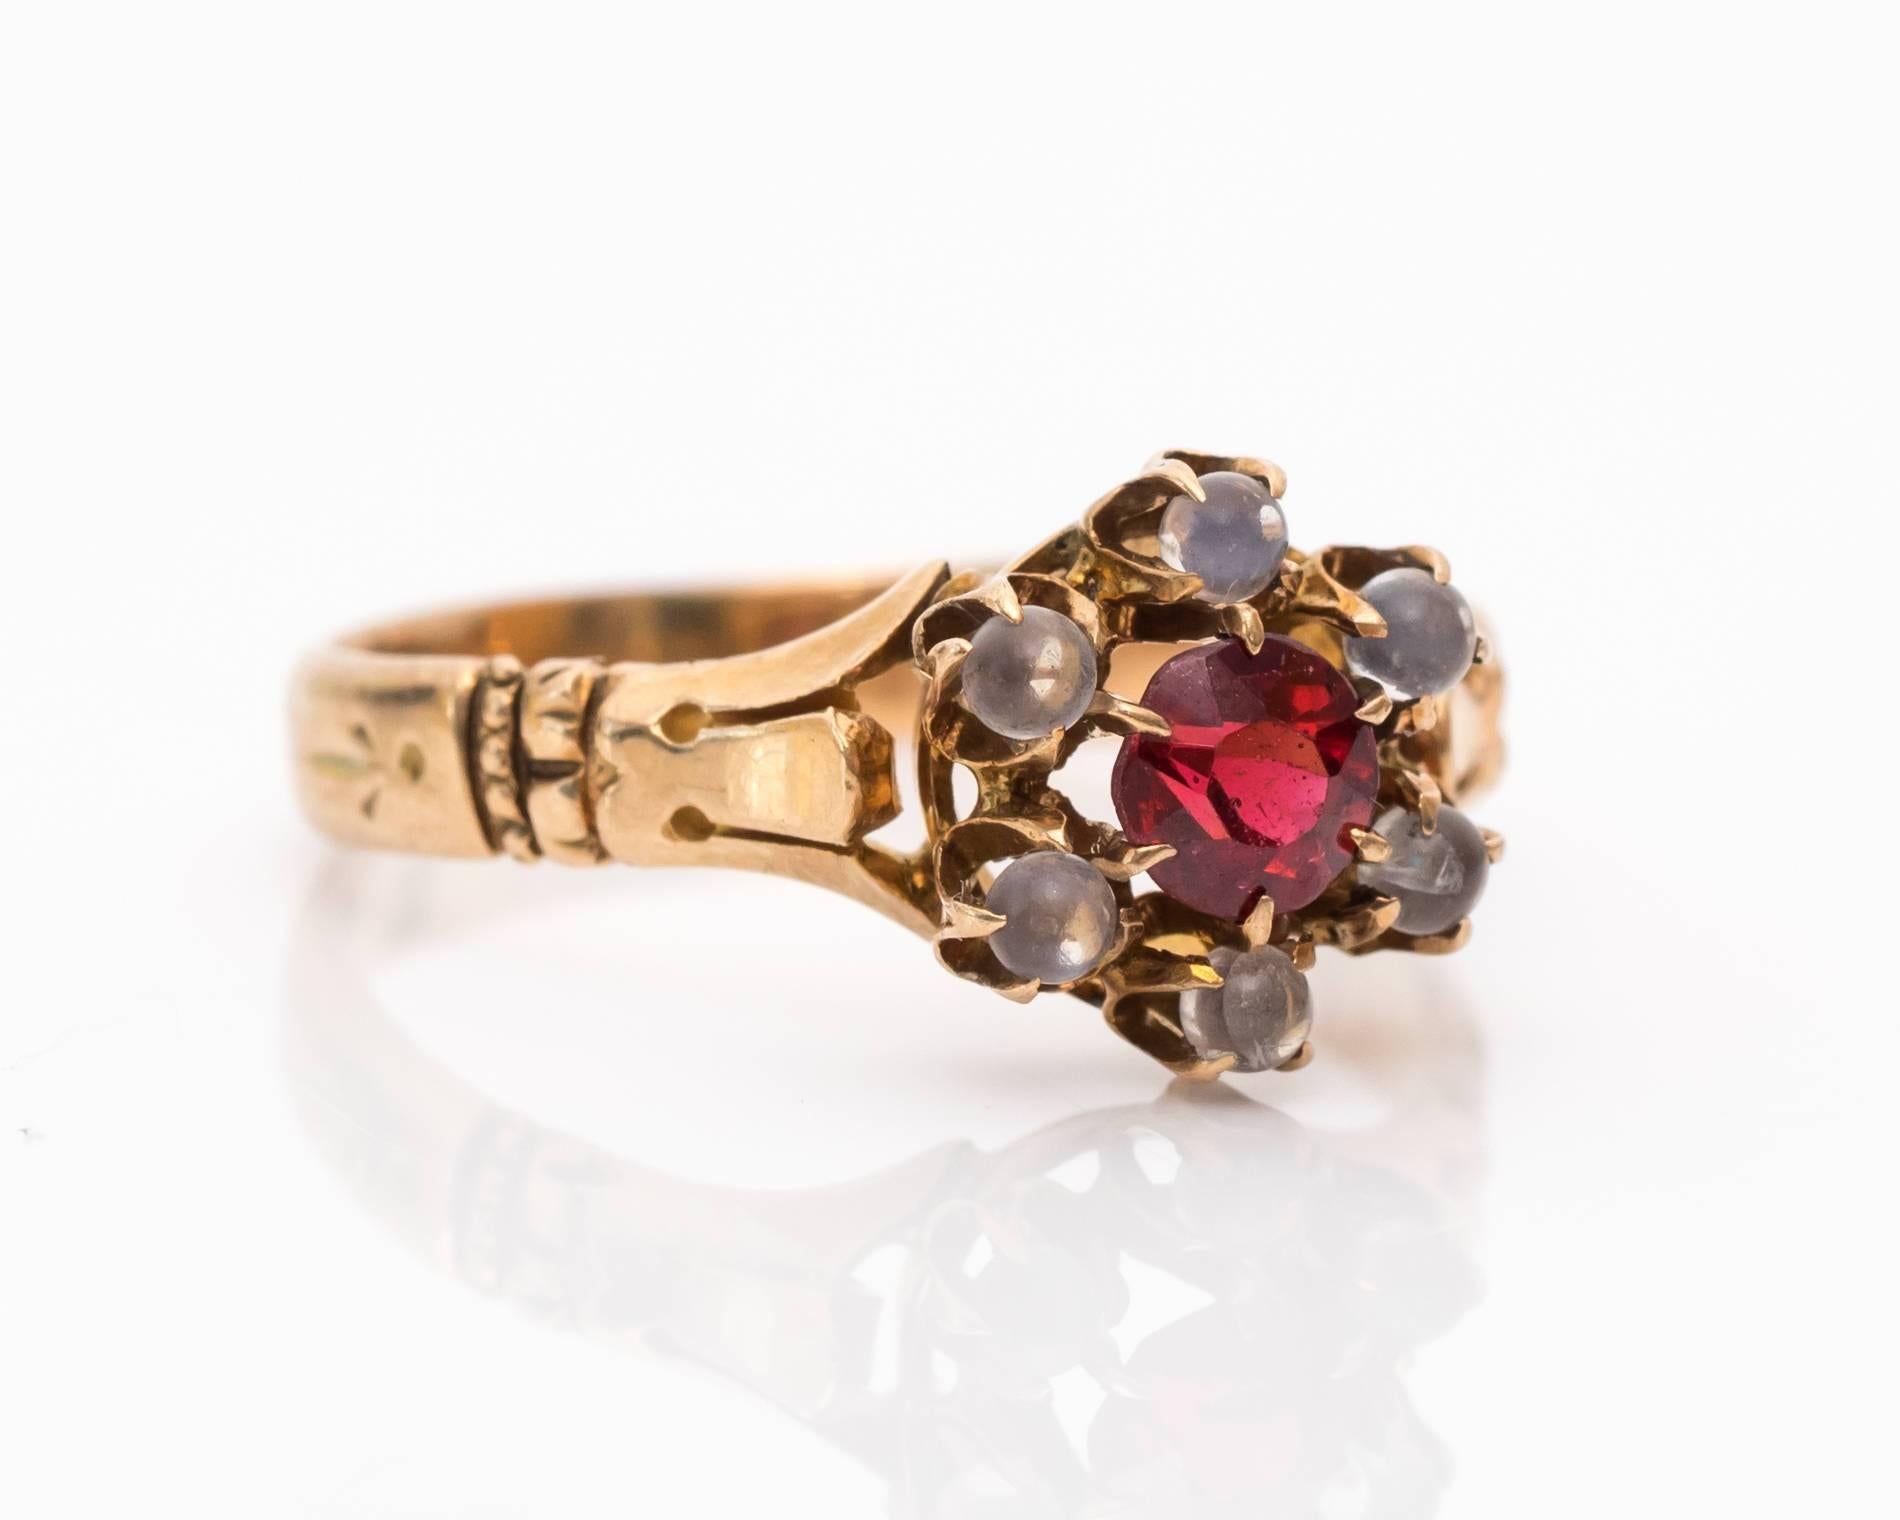 Ideal gift for a January Garnet Birthstone!

Deep pinkish red center stone complements the warn colors of the 9 karat yellow gold band. This romantic ring is full of shine and luster from both the garnet and six beaming moonstones. The traditional